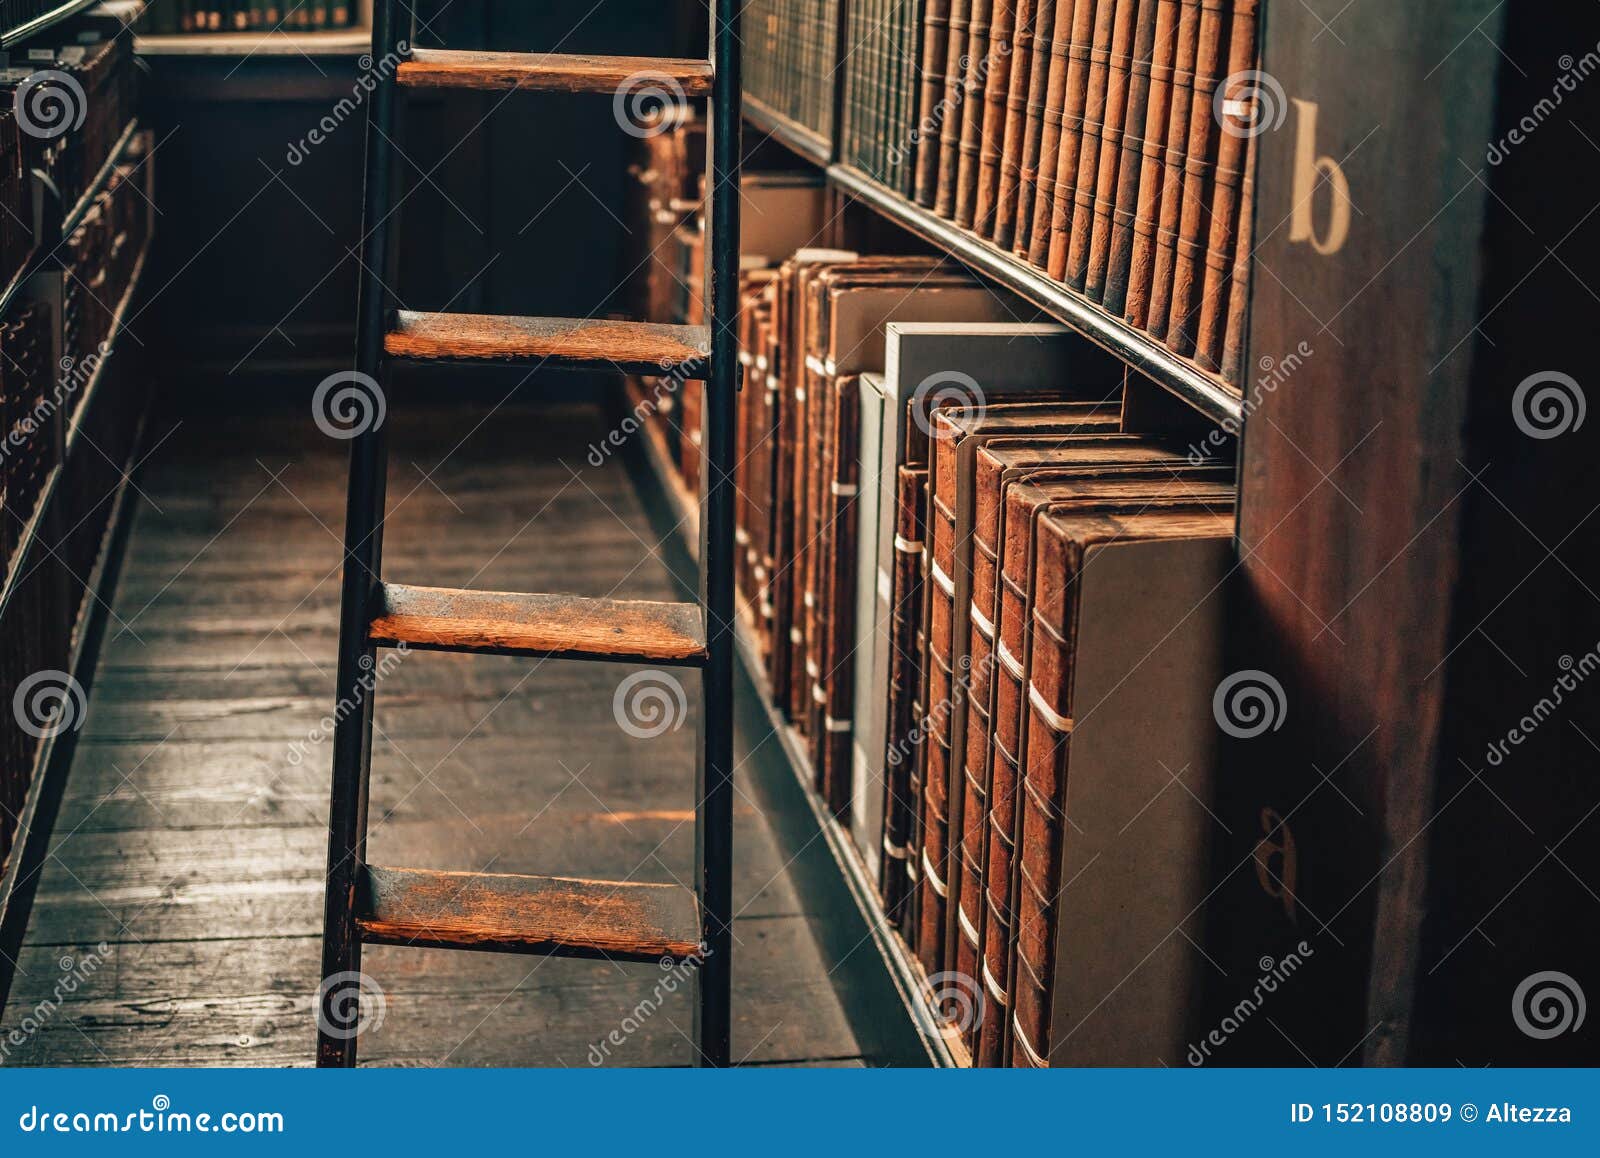 Vintage Books In Leather Covers On Bookshelf Cabinet With Ladder